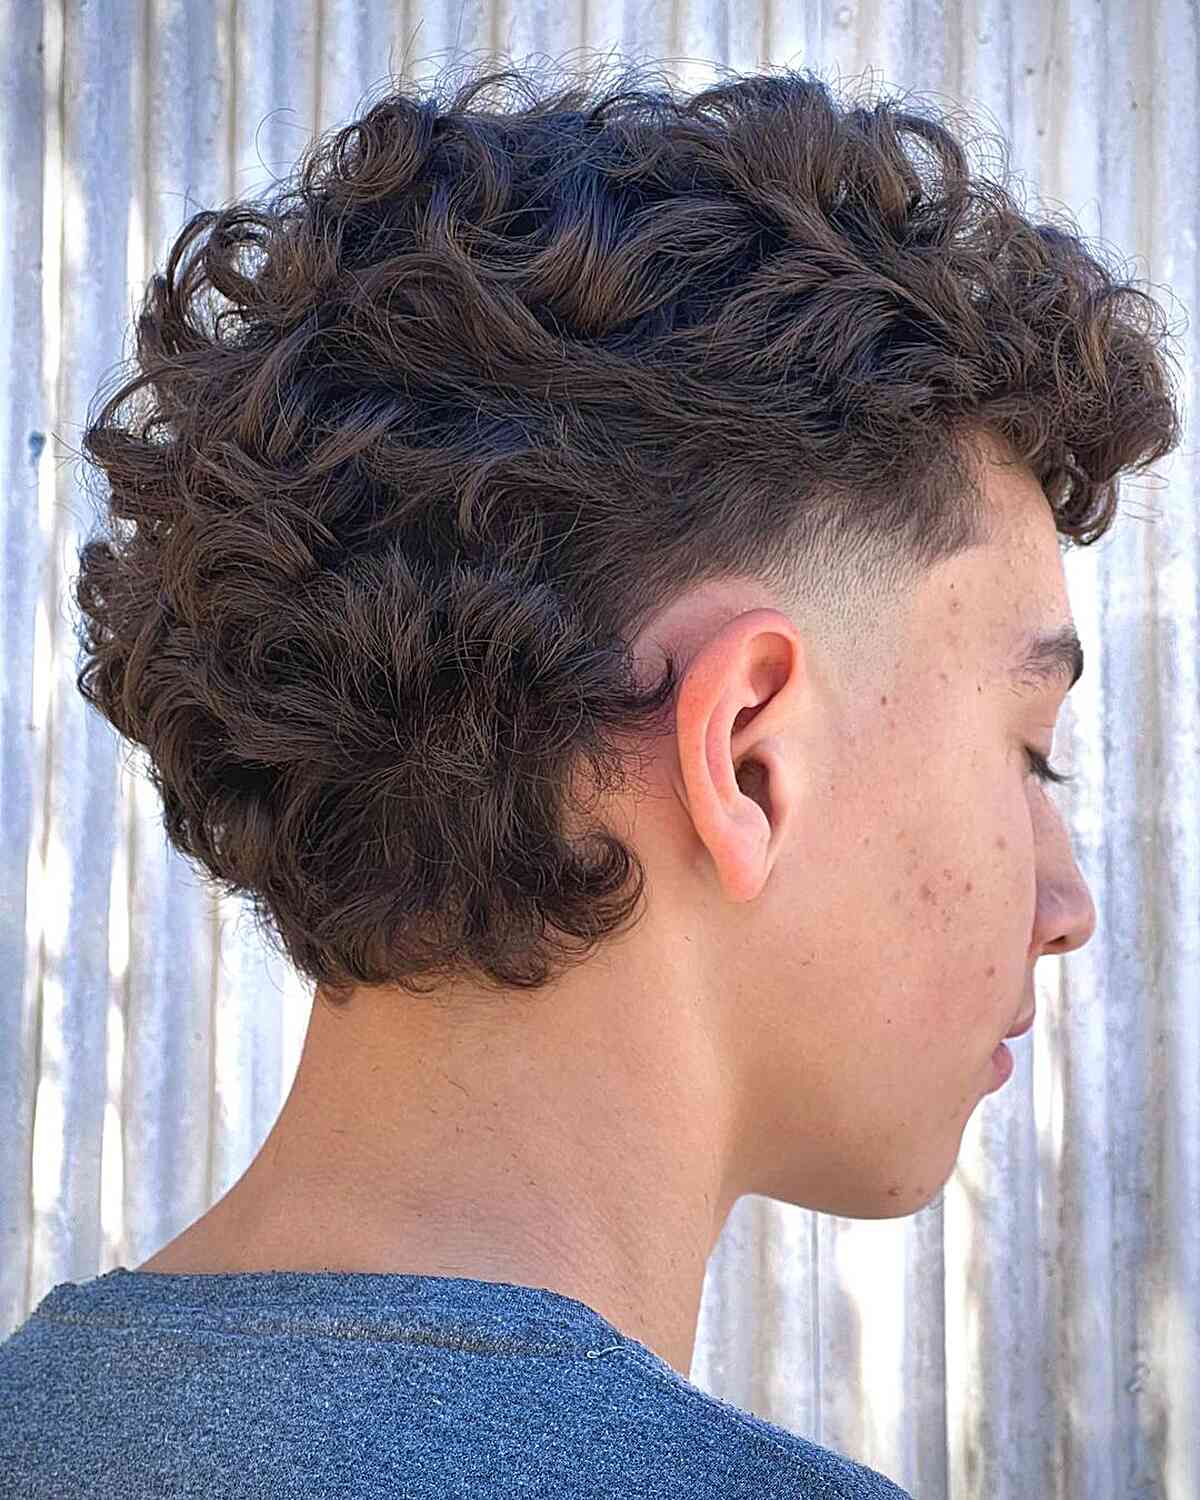 Curly Mullet with Shaved Sides for Men